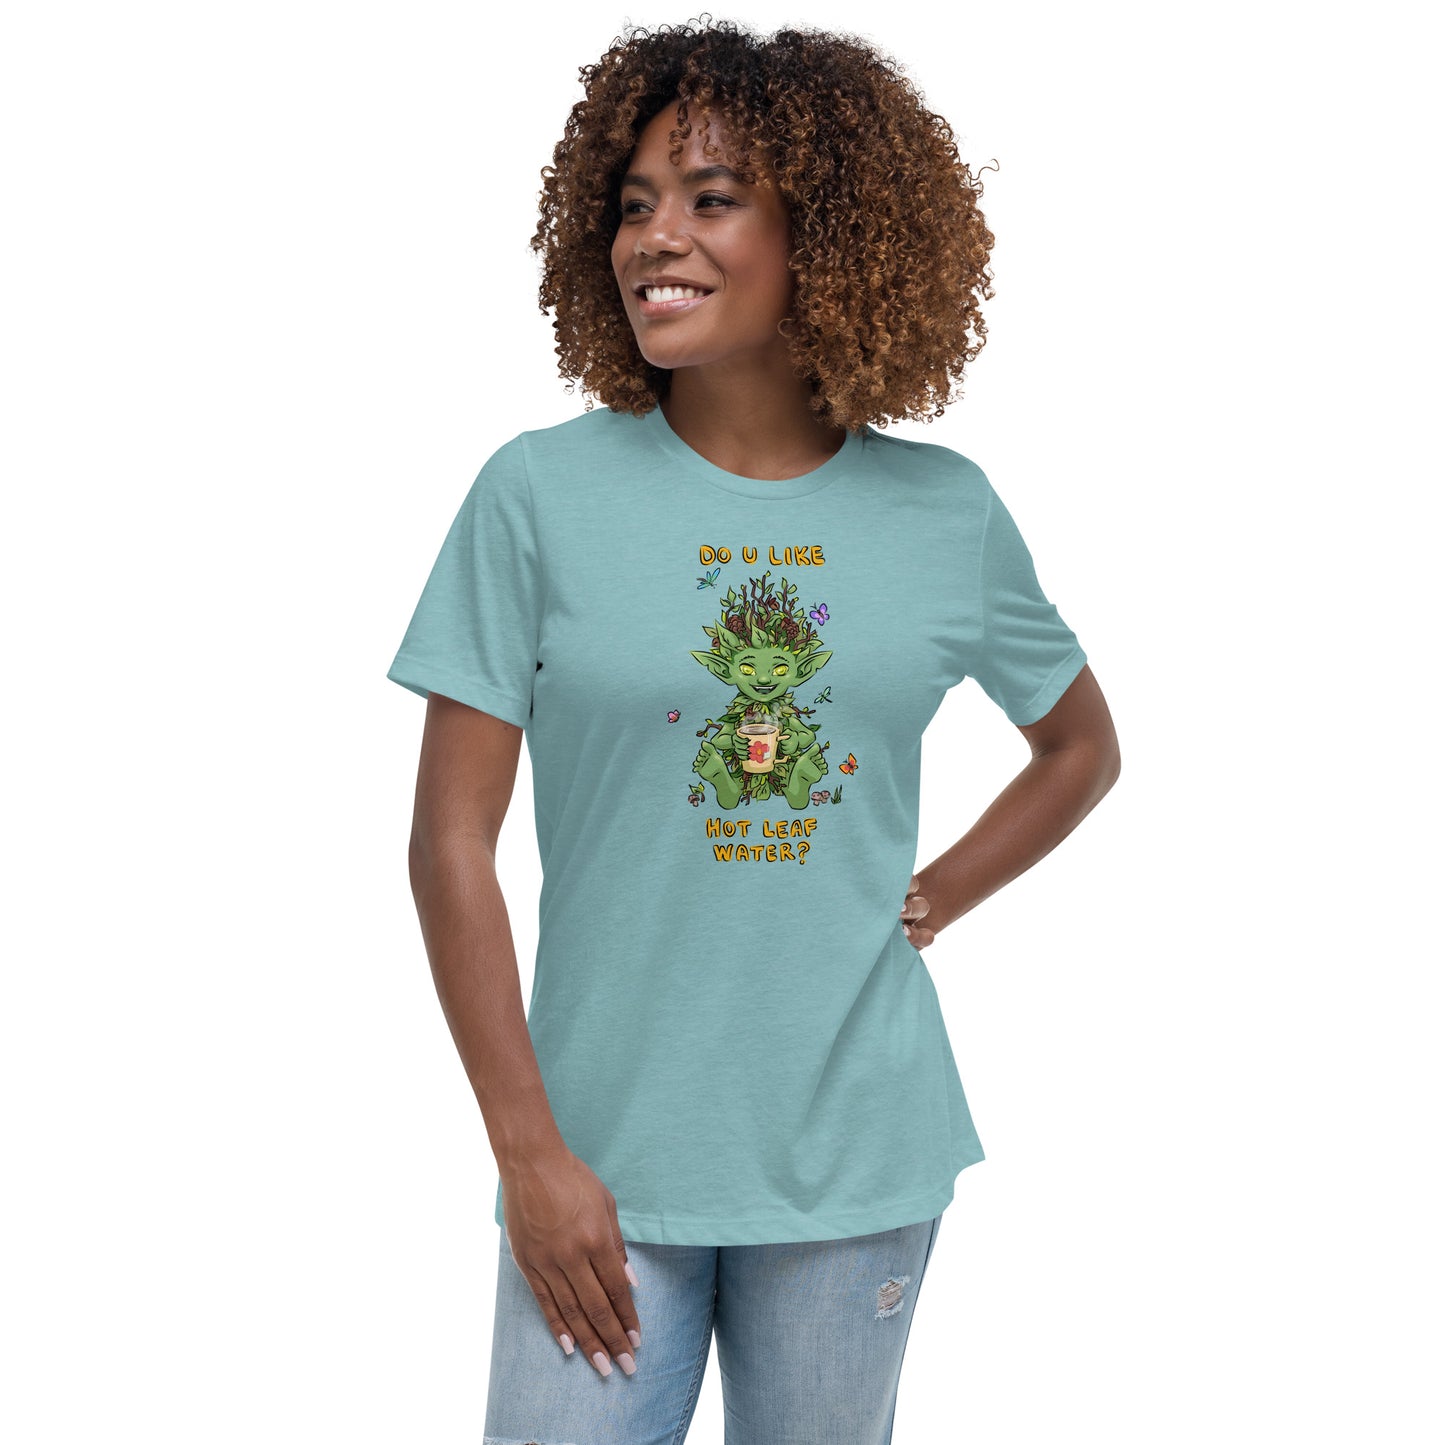 "Hot Leaf Water" Women's Relaxed T-Shirt (The Guild Codex)